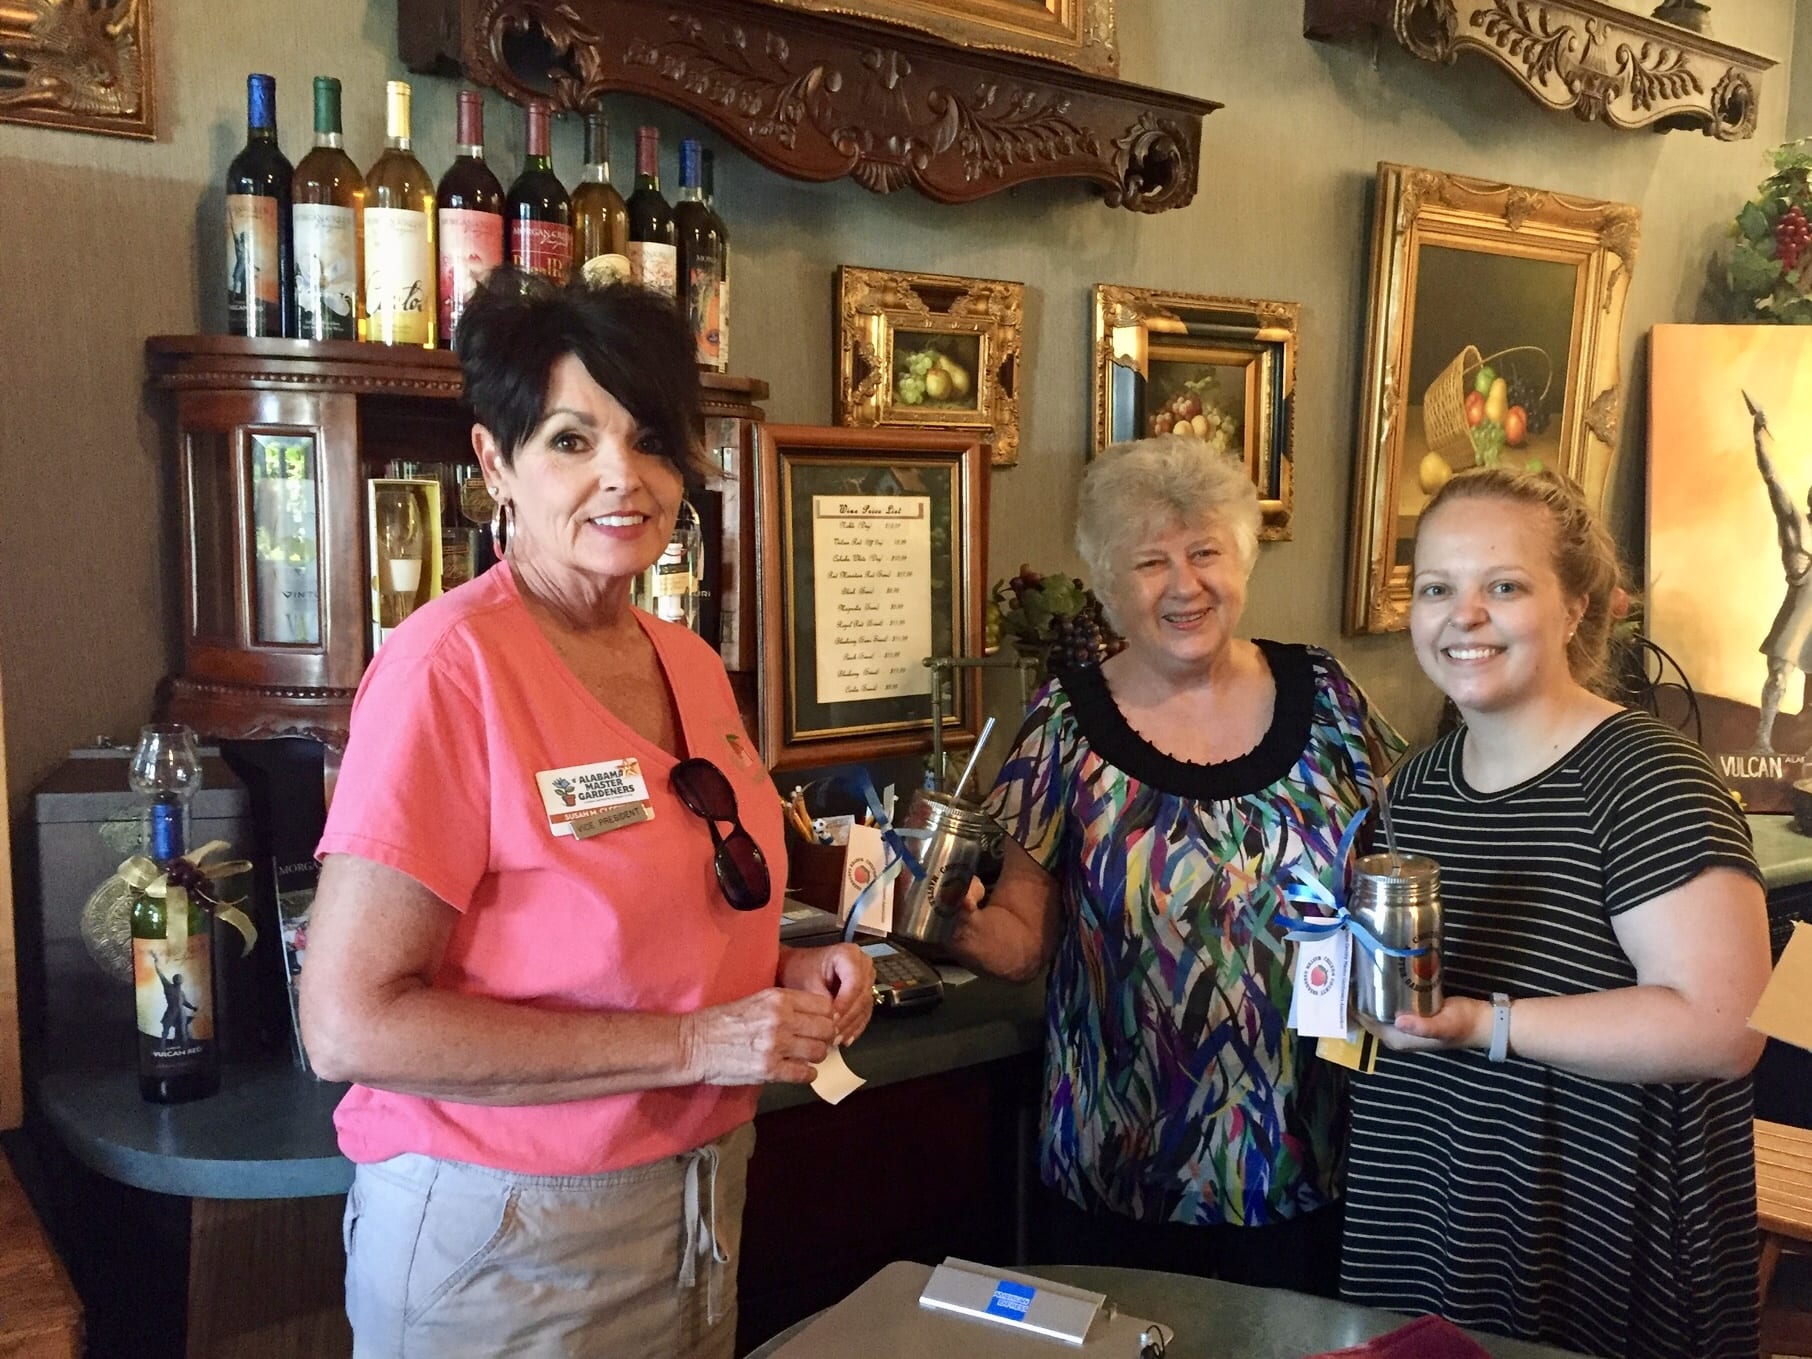 V.P. Giving hostesses at winery their gift.